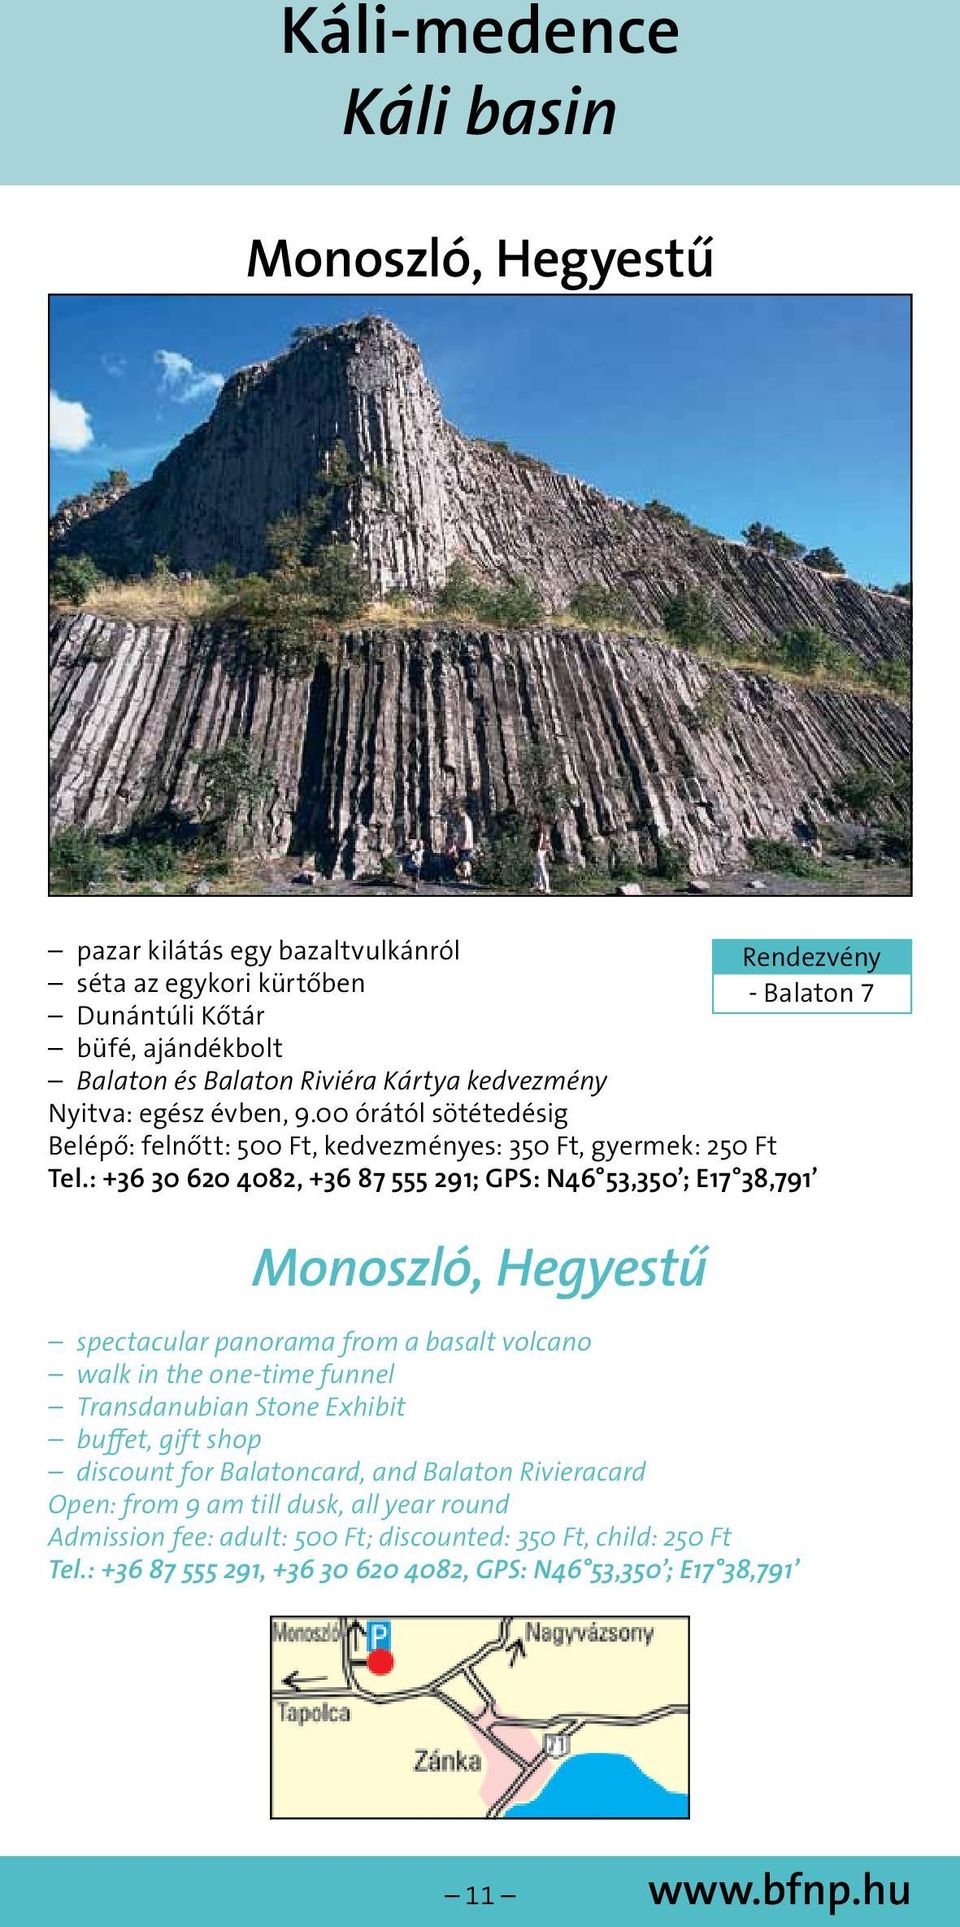 : +36 30 620 4082, +36 87 555 291; GPS: N46 53,350 ; E17 38,791 Monoszló, Hegyestű spectacular panorama from a basalt volcano walk in the one-time funnel Transdanubian Stone Exhibit